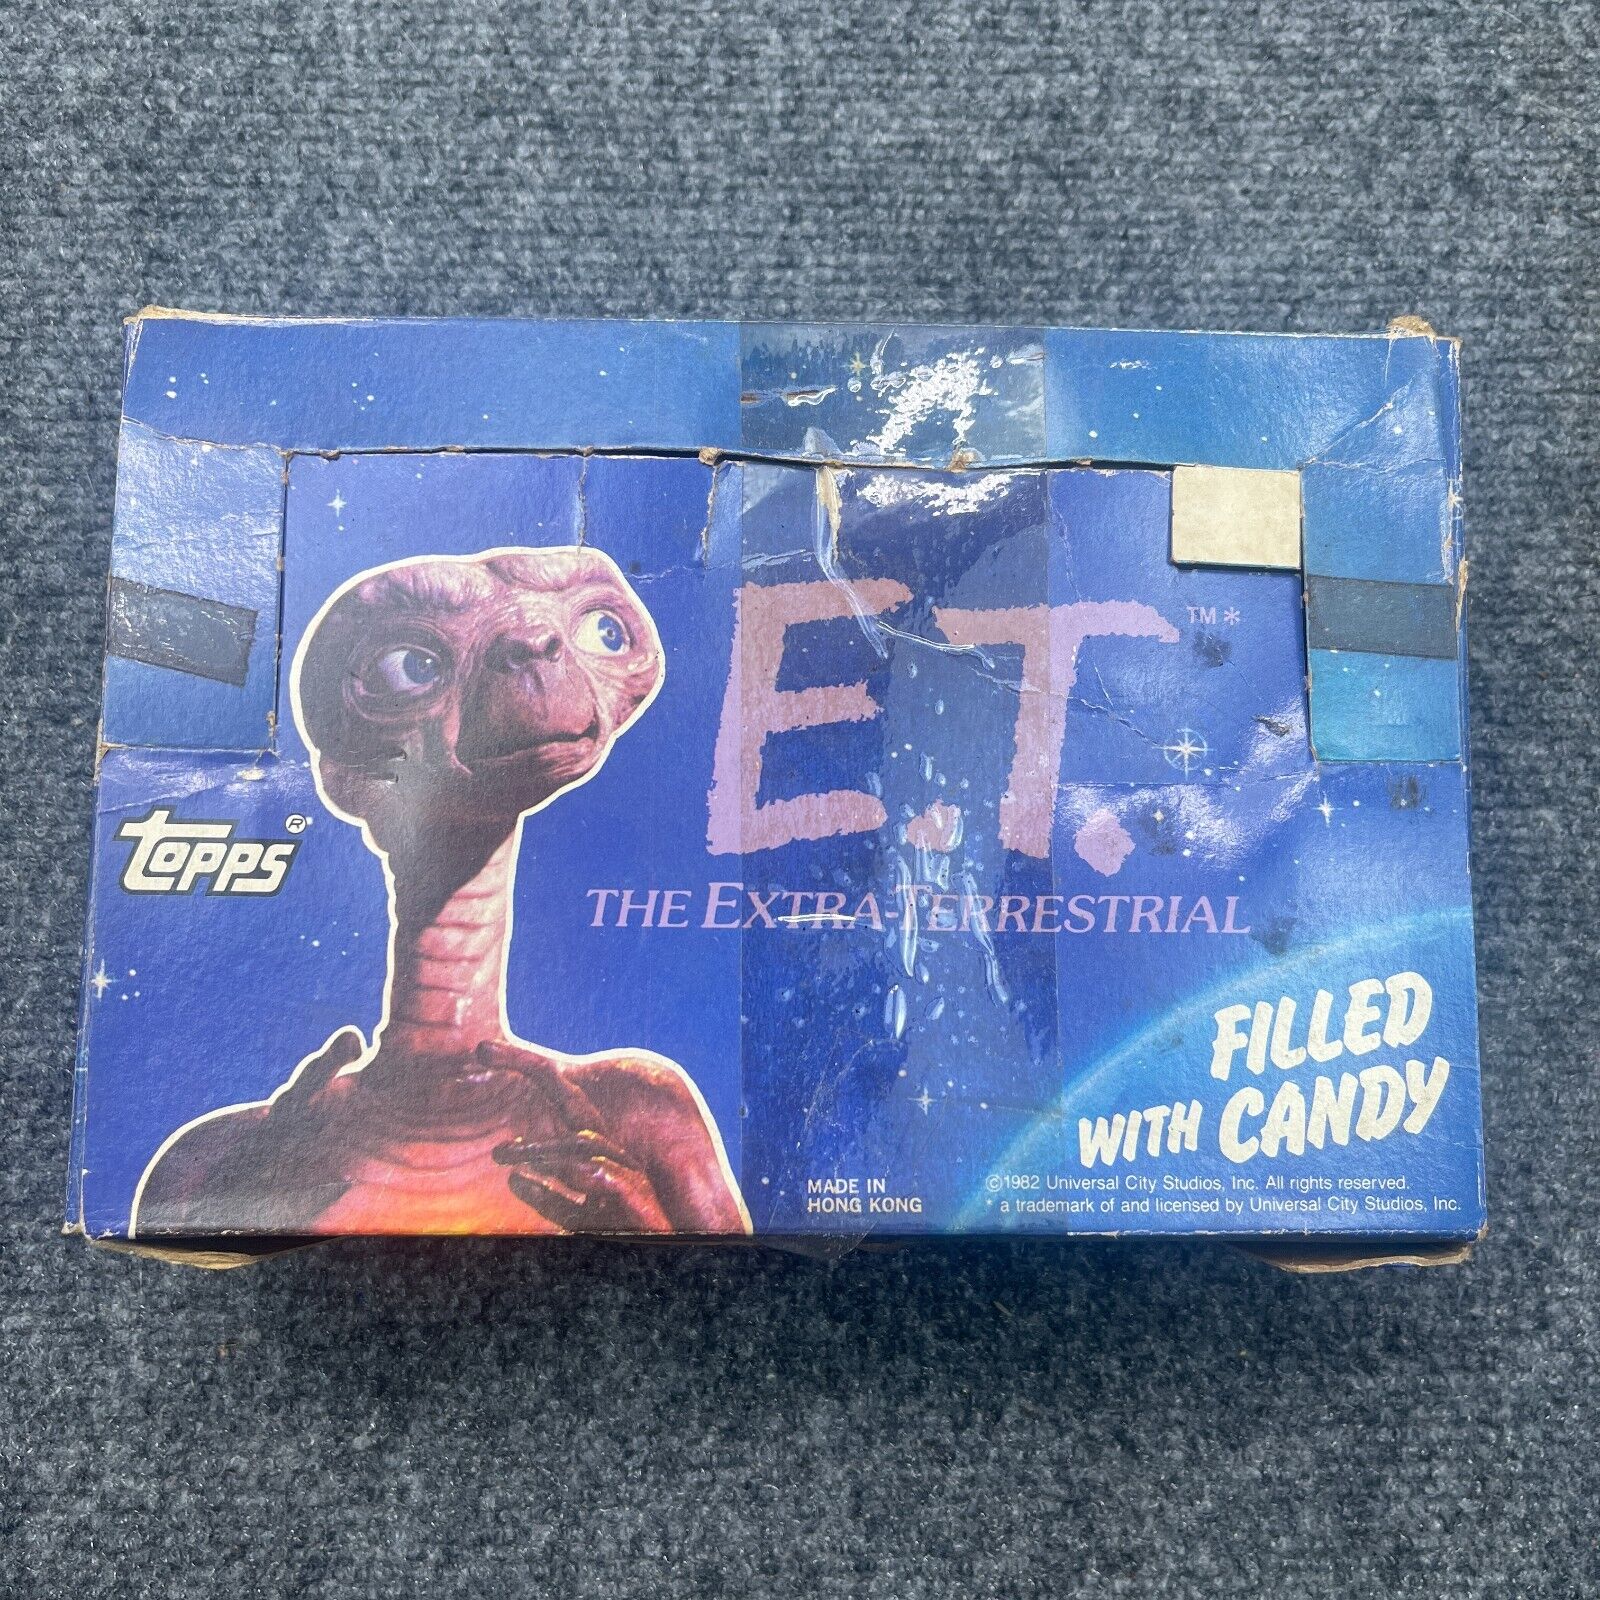 VTG E.T. Extra Terrestrial Topps Filled with Candy Set of 14 Figurines + Box